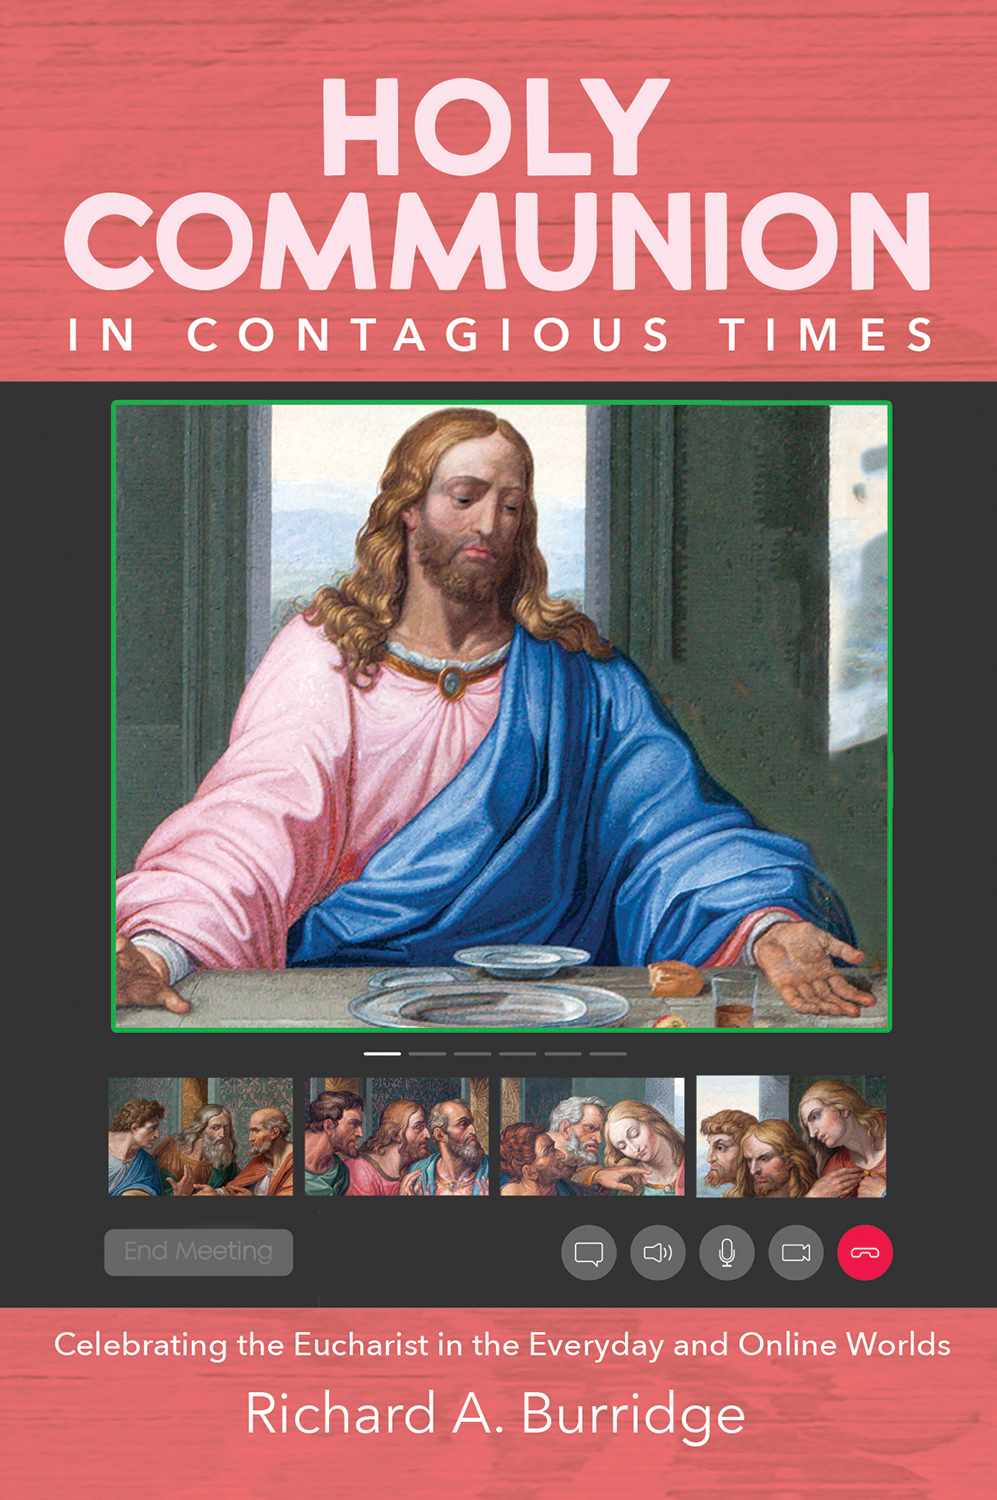 Holy Communion in Contagious Times book cover